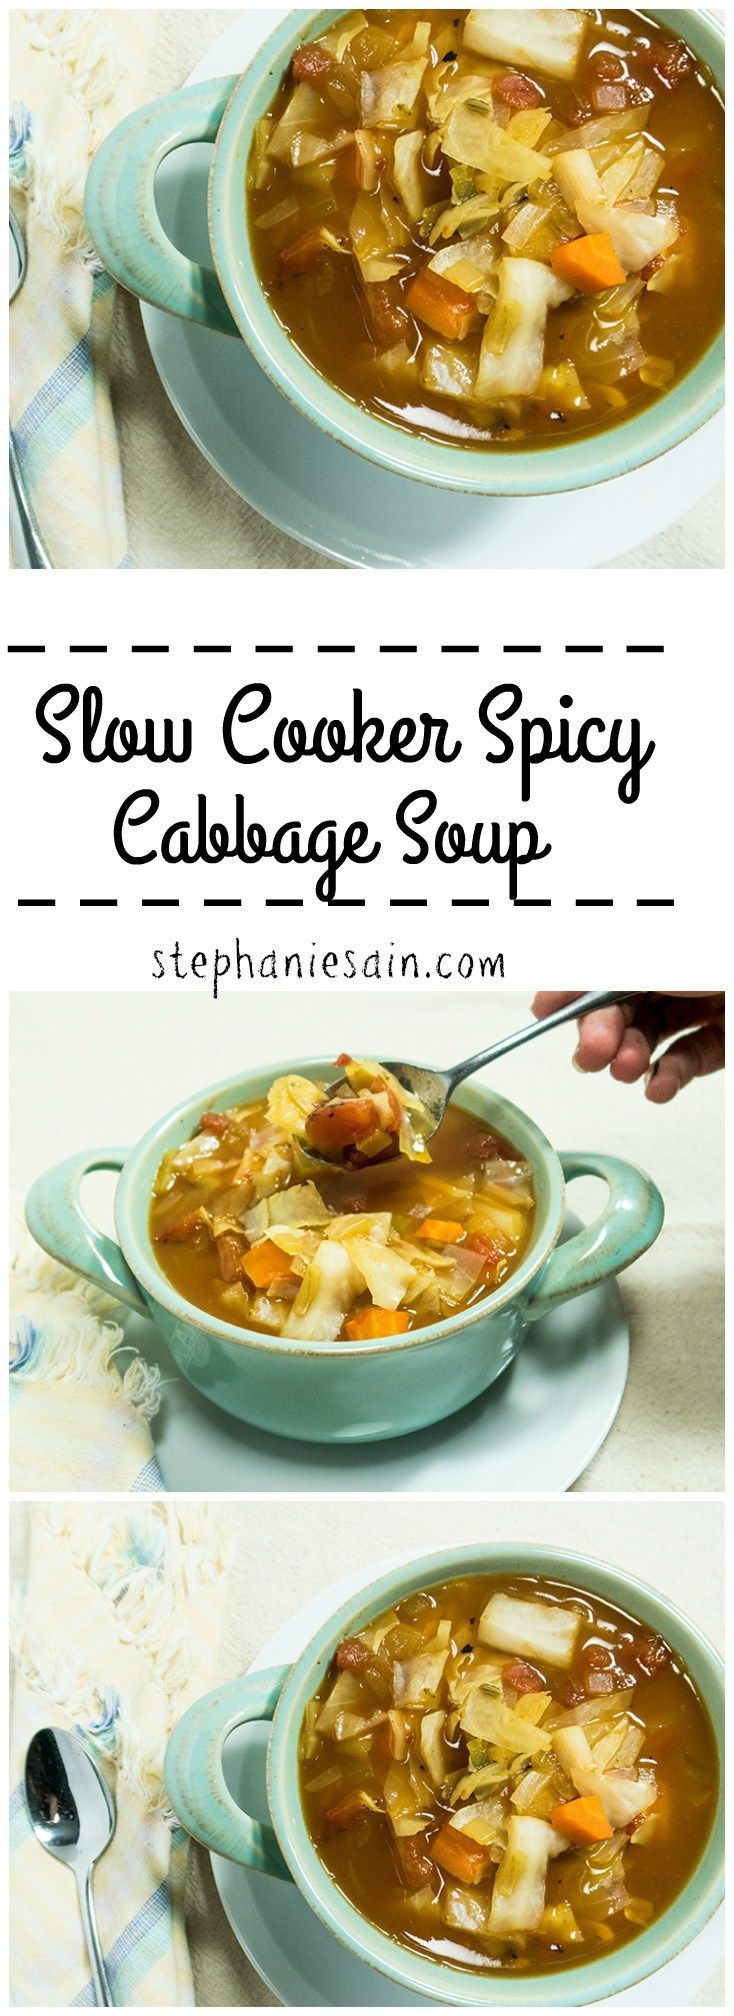 Slow Cooker Cabbage Recipes Vegetarian
 This Slow Cooker Spicy Cabbage Soup is chocked full of